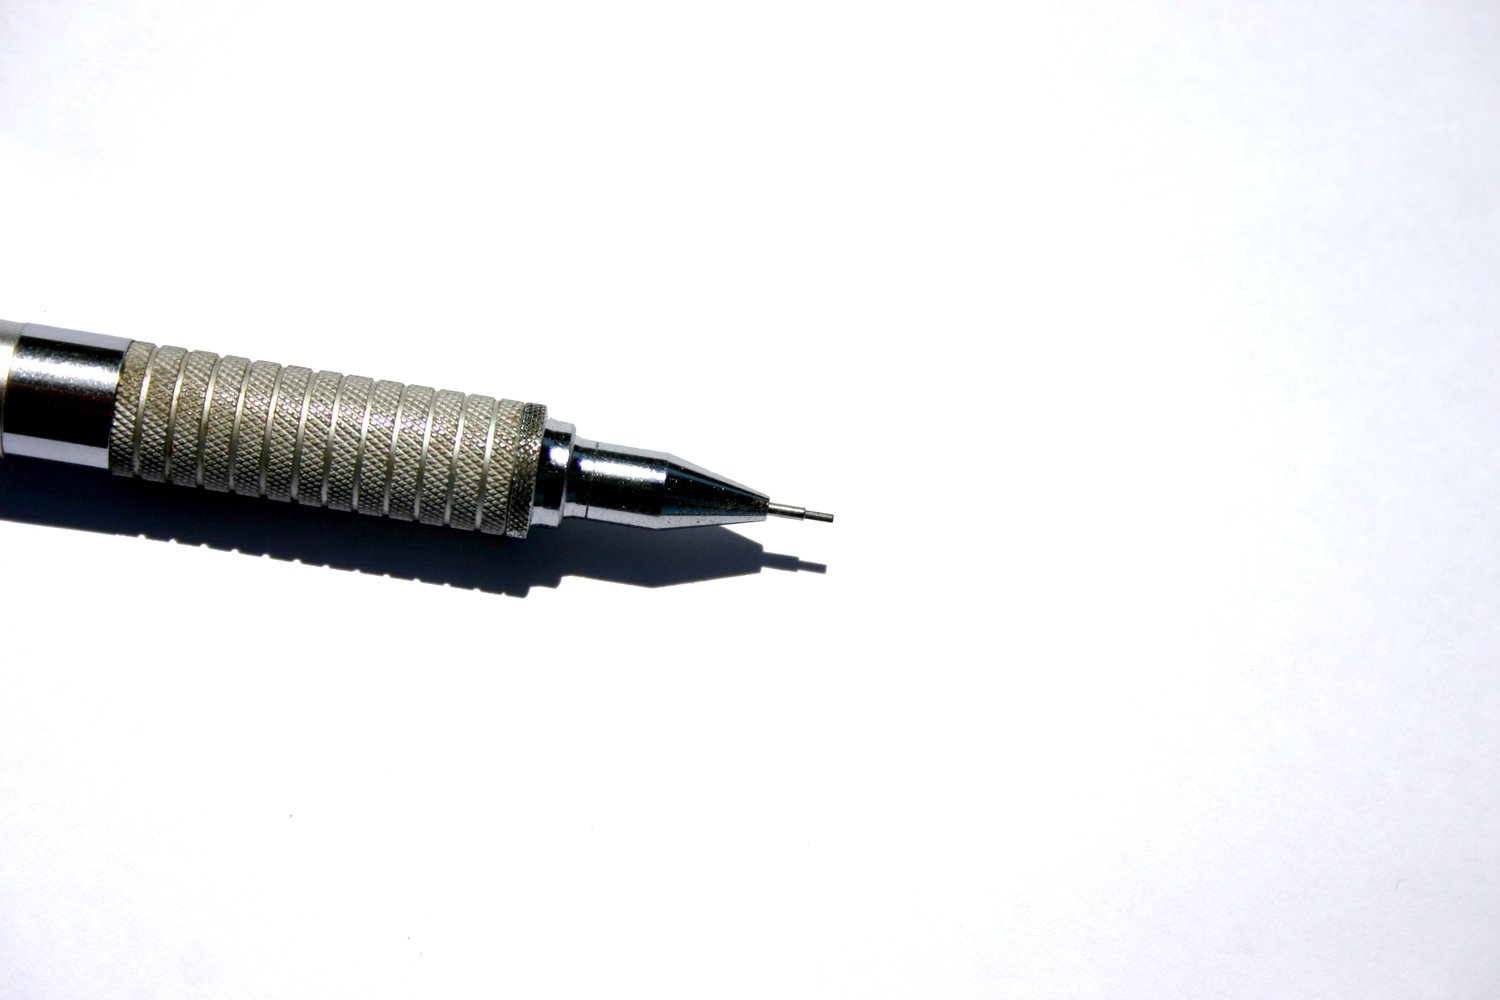 a small metal pen is on a white table